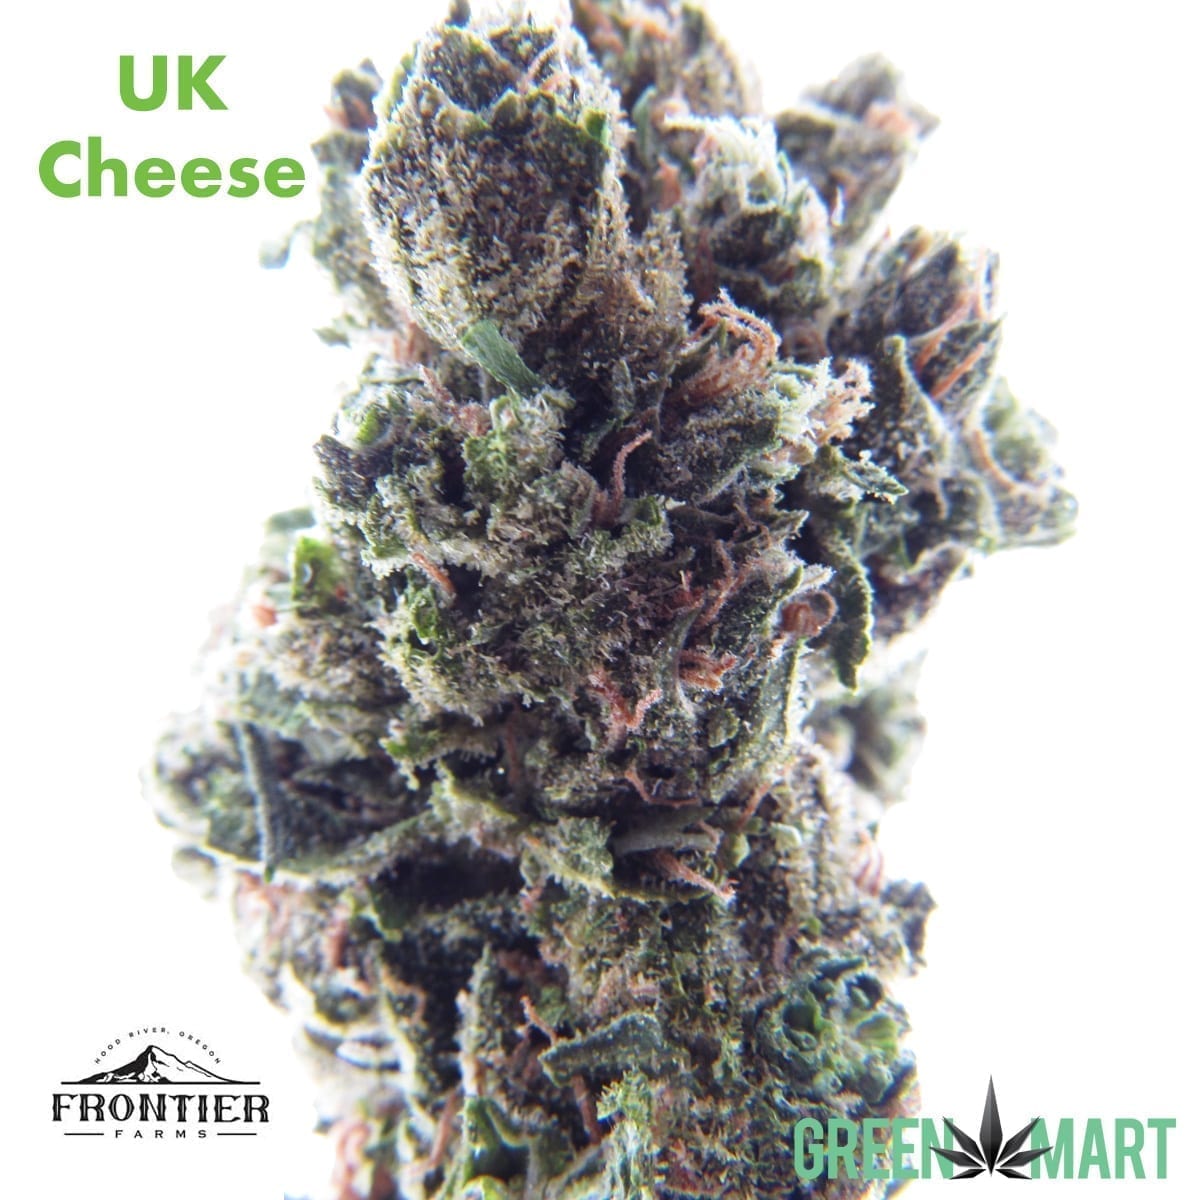 UK Cheese by FrontierFarms $80 Ounce!